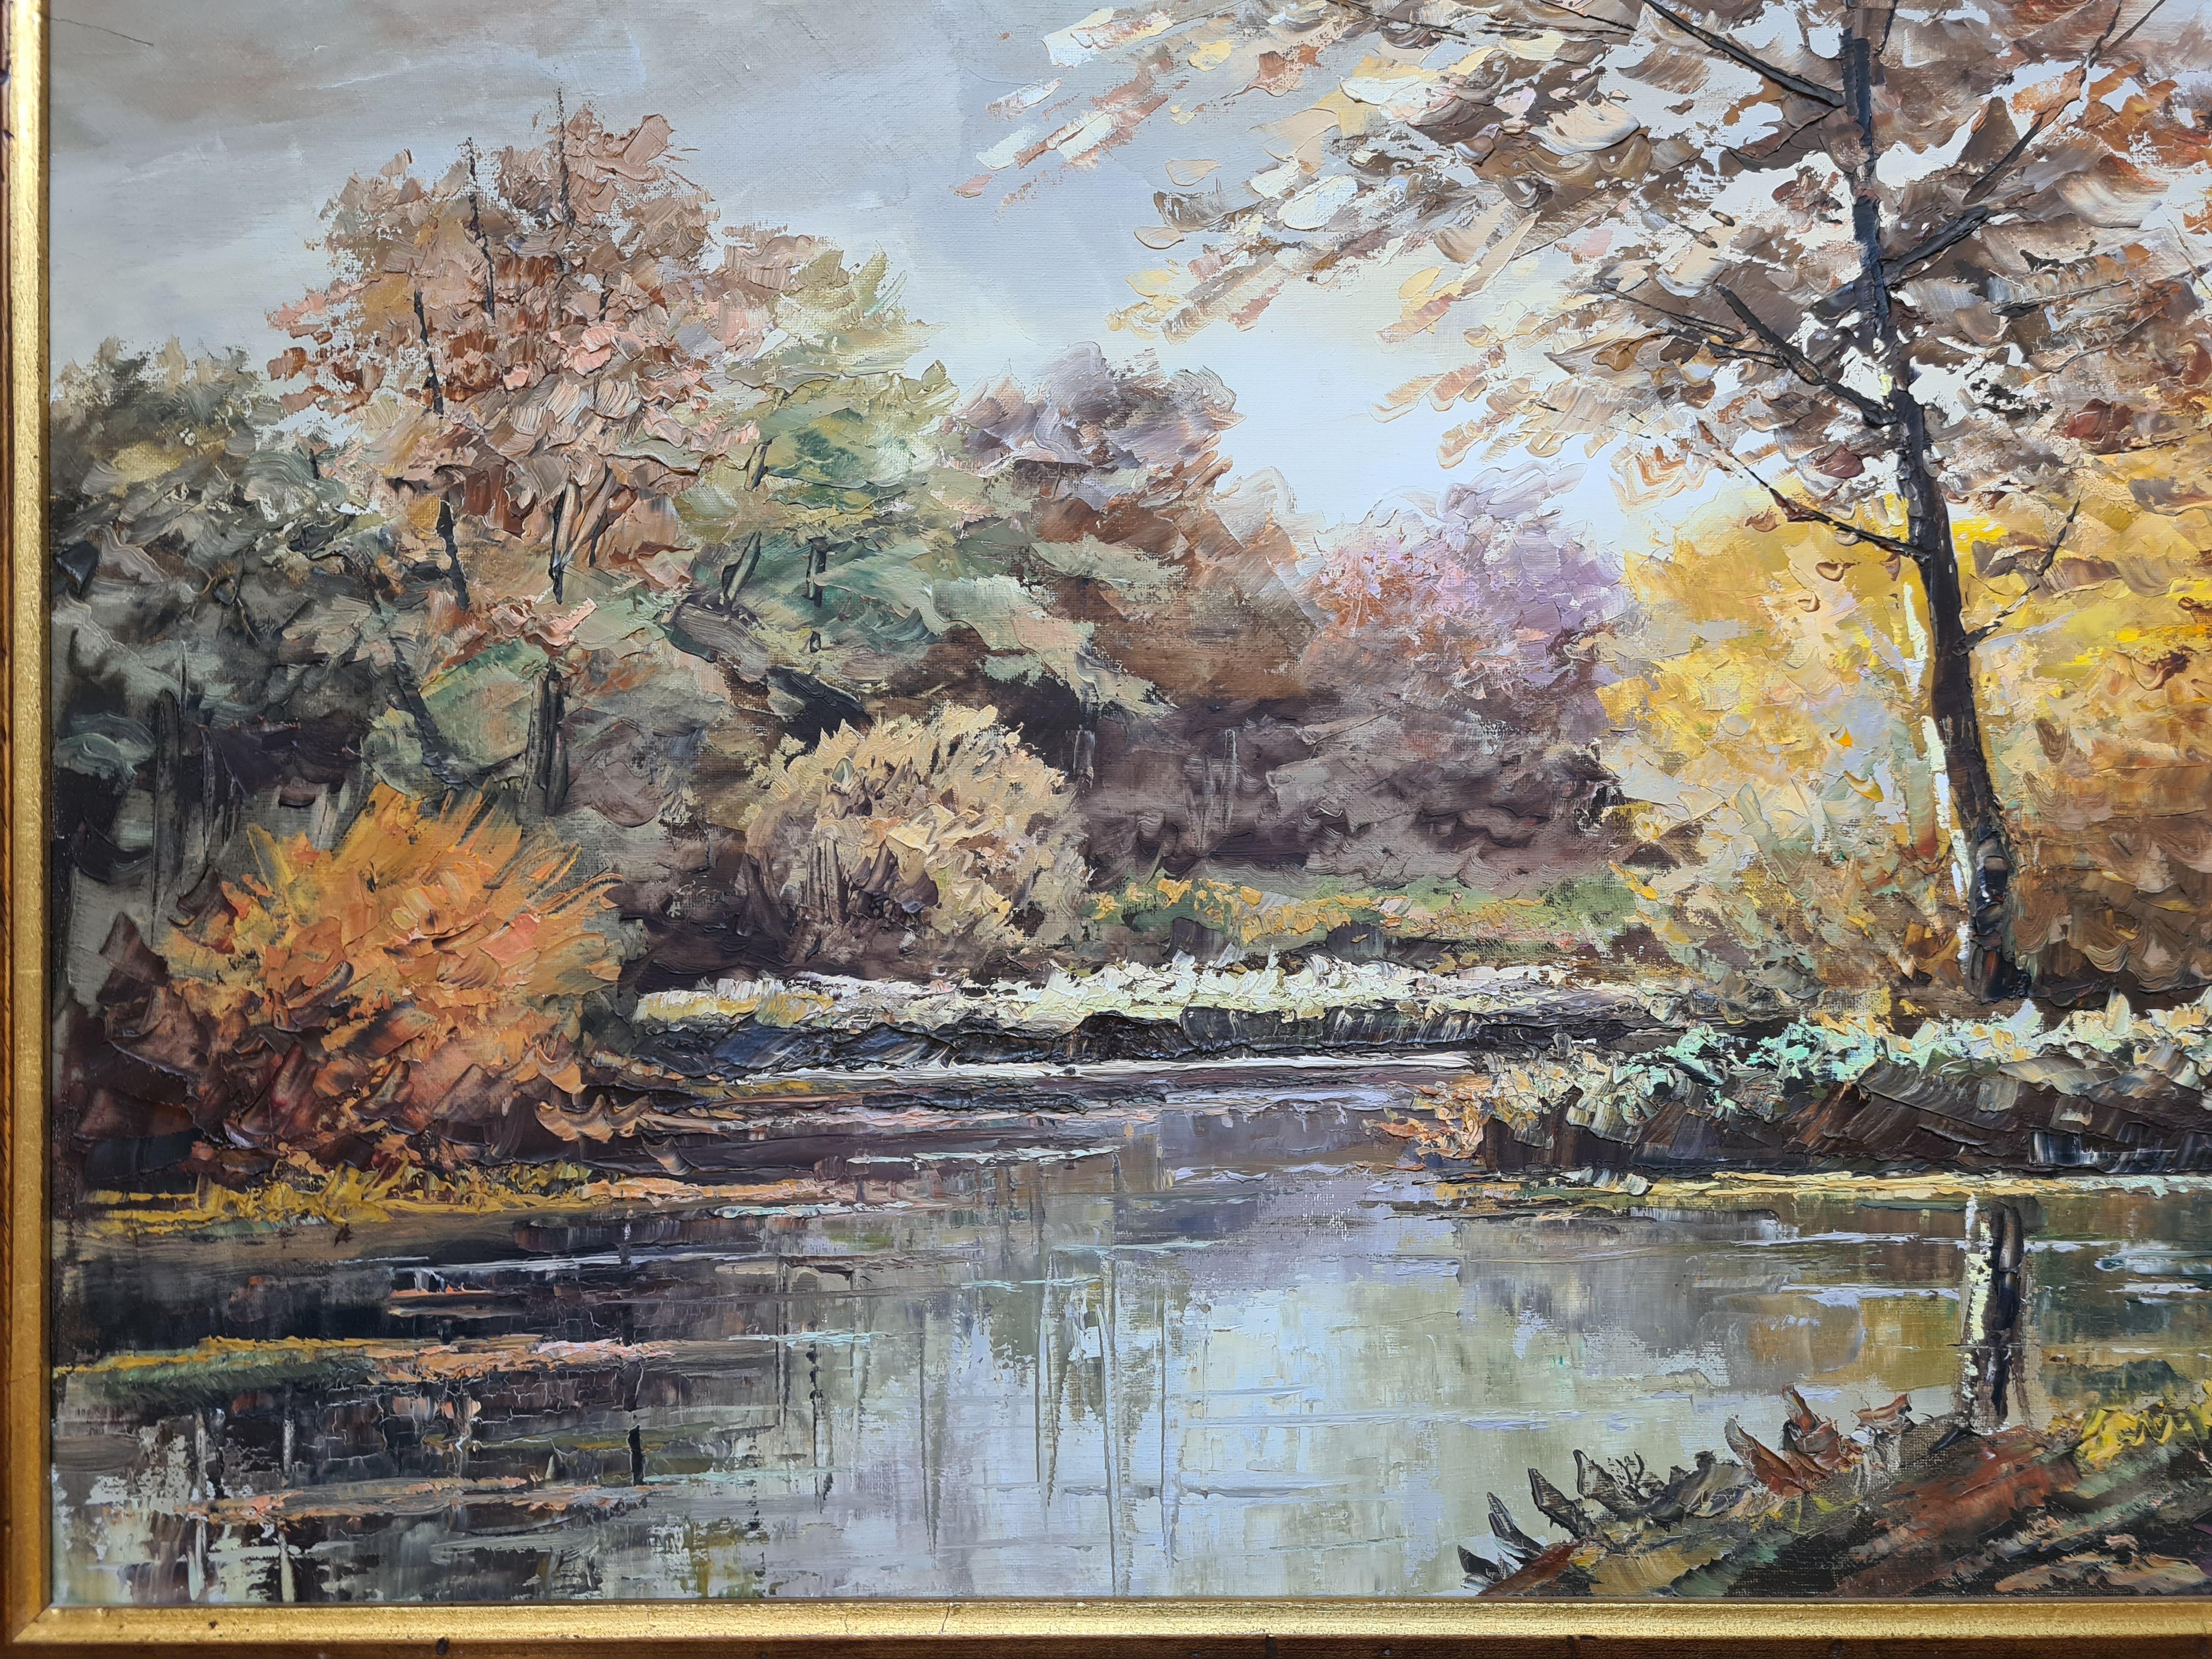 Autumn at the Riverbank, Large Scale French Rural Landscape. Oil on Canvas. - Brown Landscape Painting by G Lorique